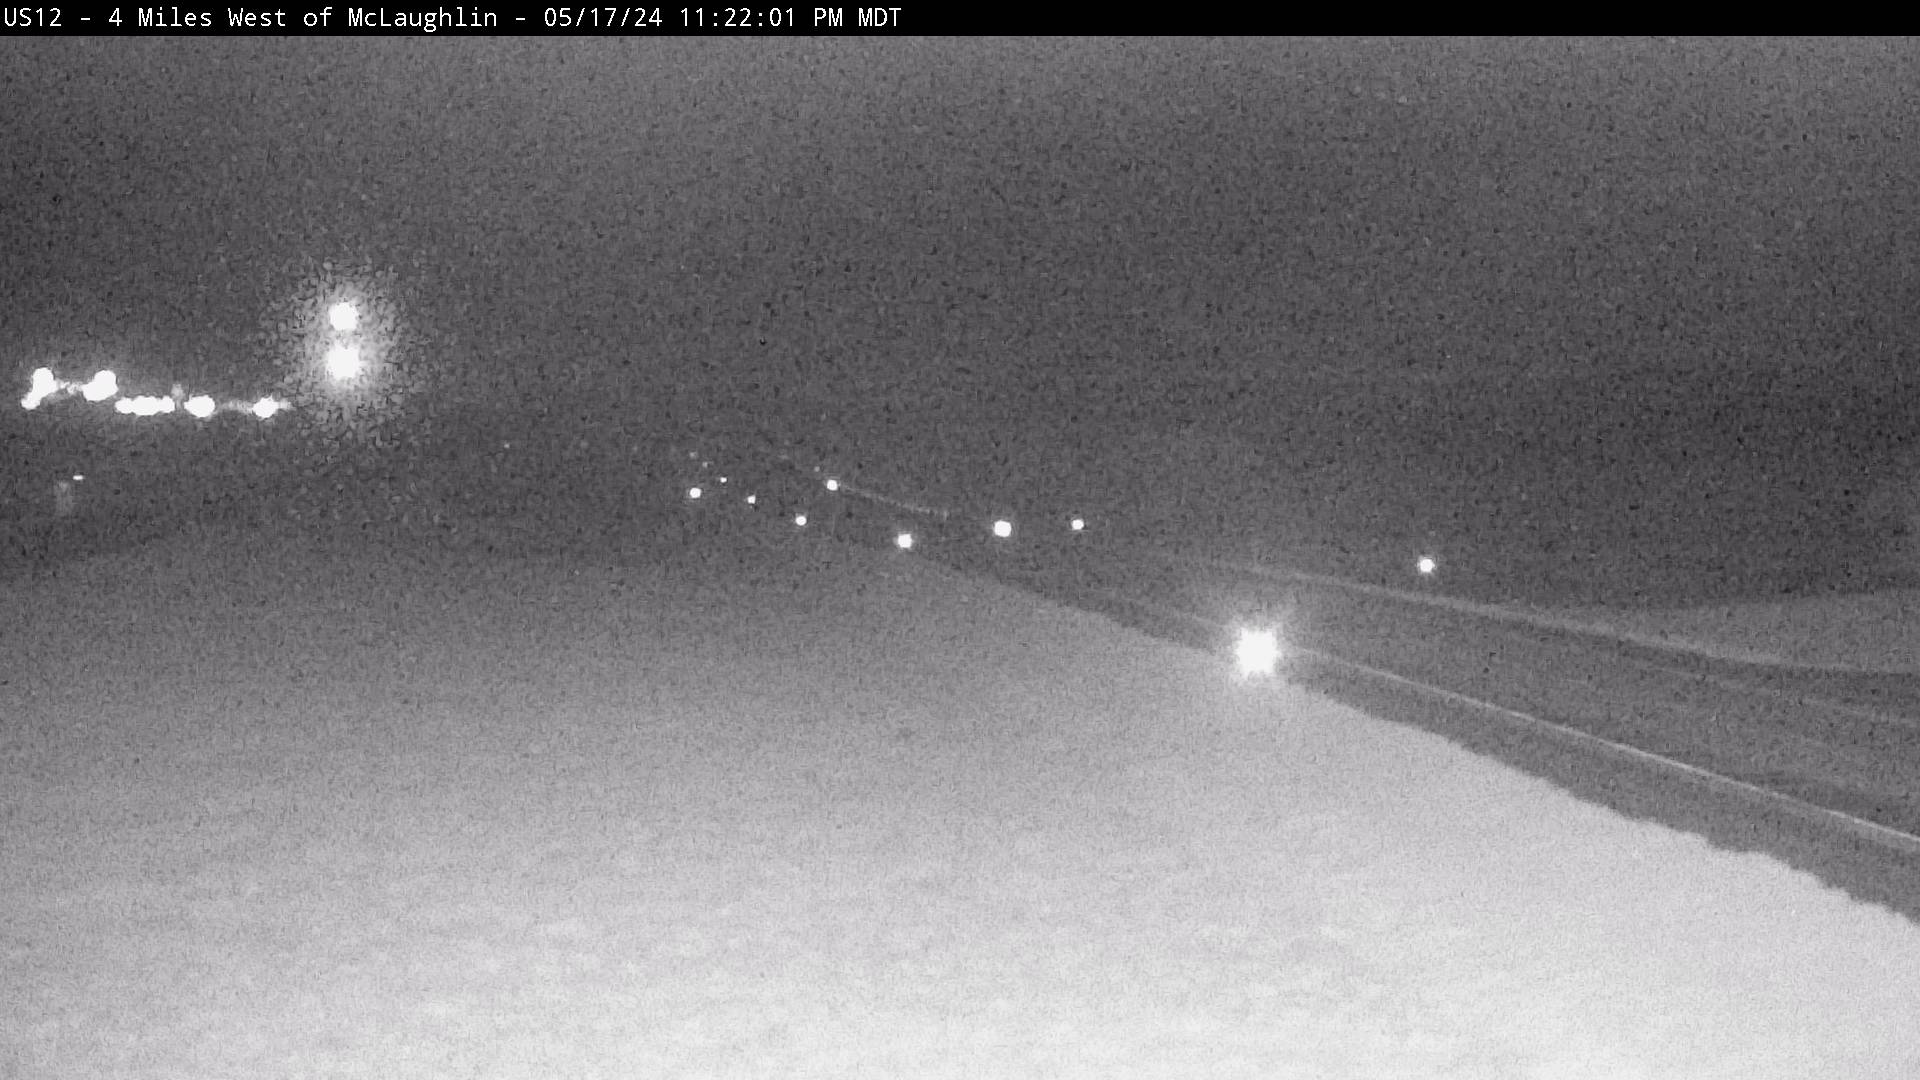 4 miles west of town US-12 @ MP 154 - East Traffic Camera